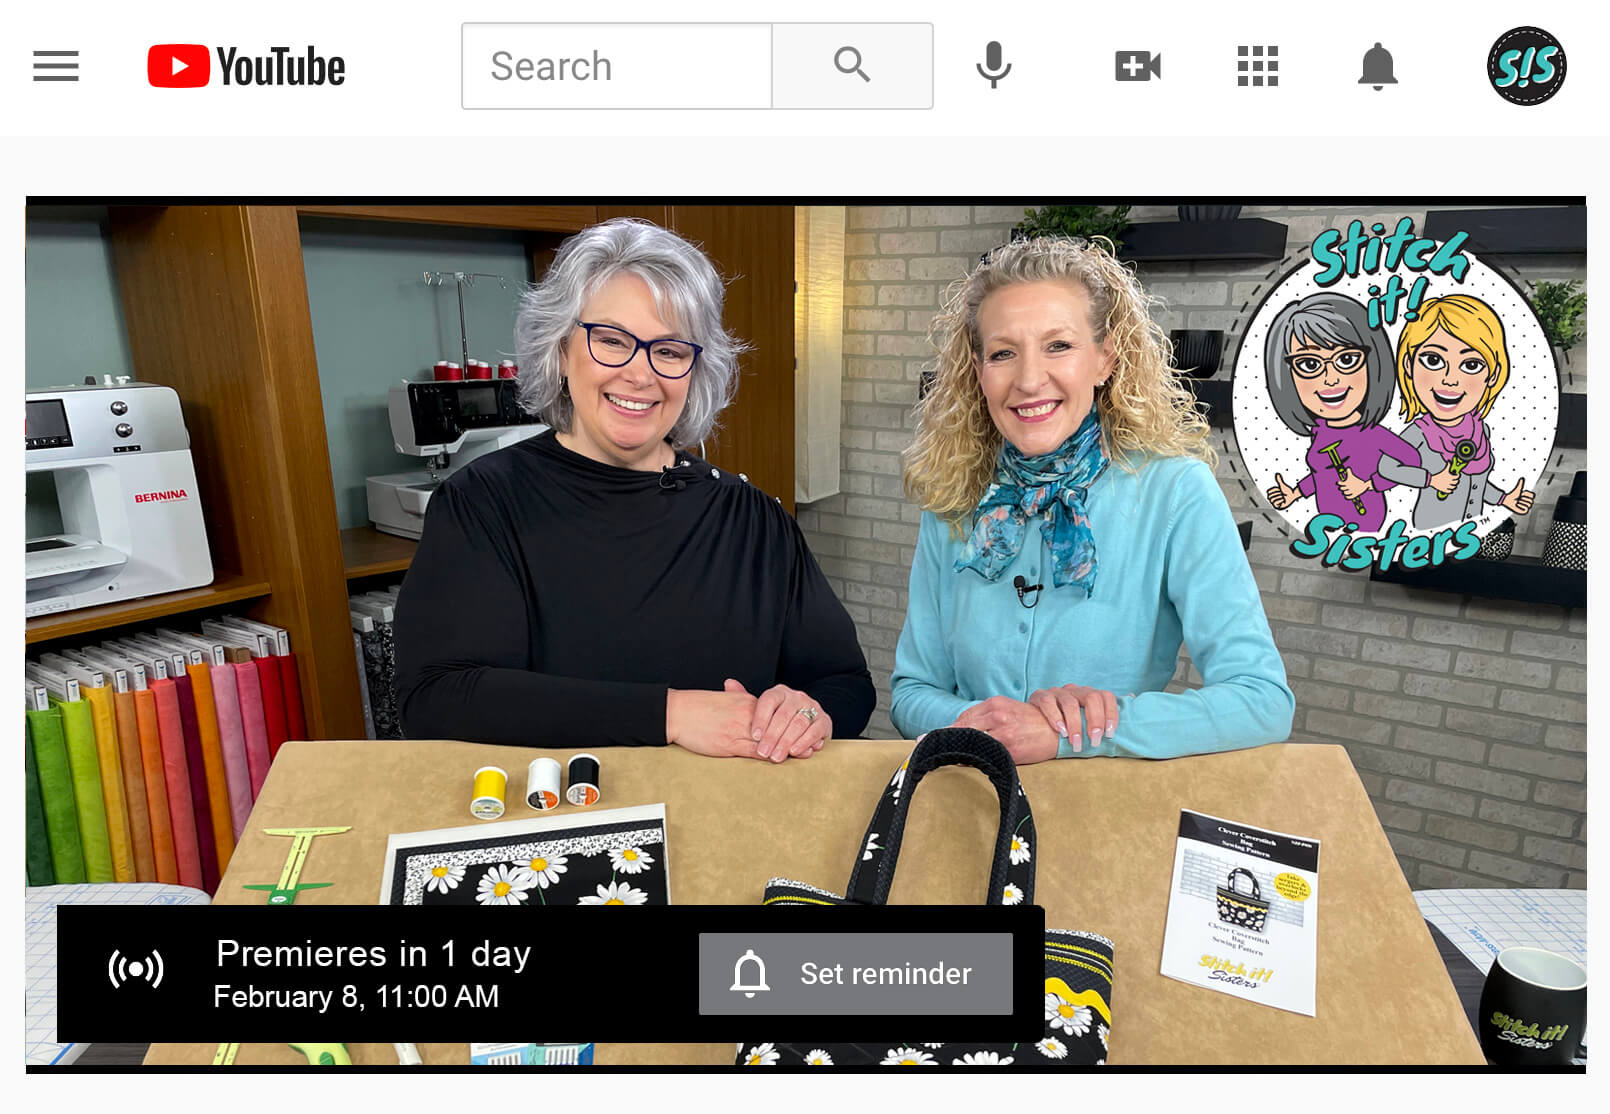 Deanna Springer and guest Pam Mahshie on the set of Stitch it! Sisters Clever Coverstitch Serger Bag Sewing Video